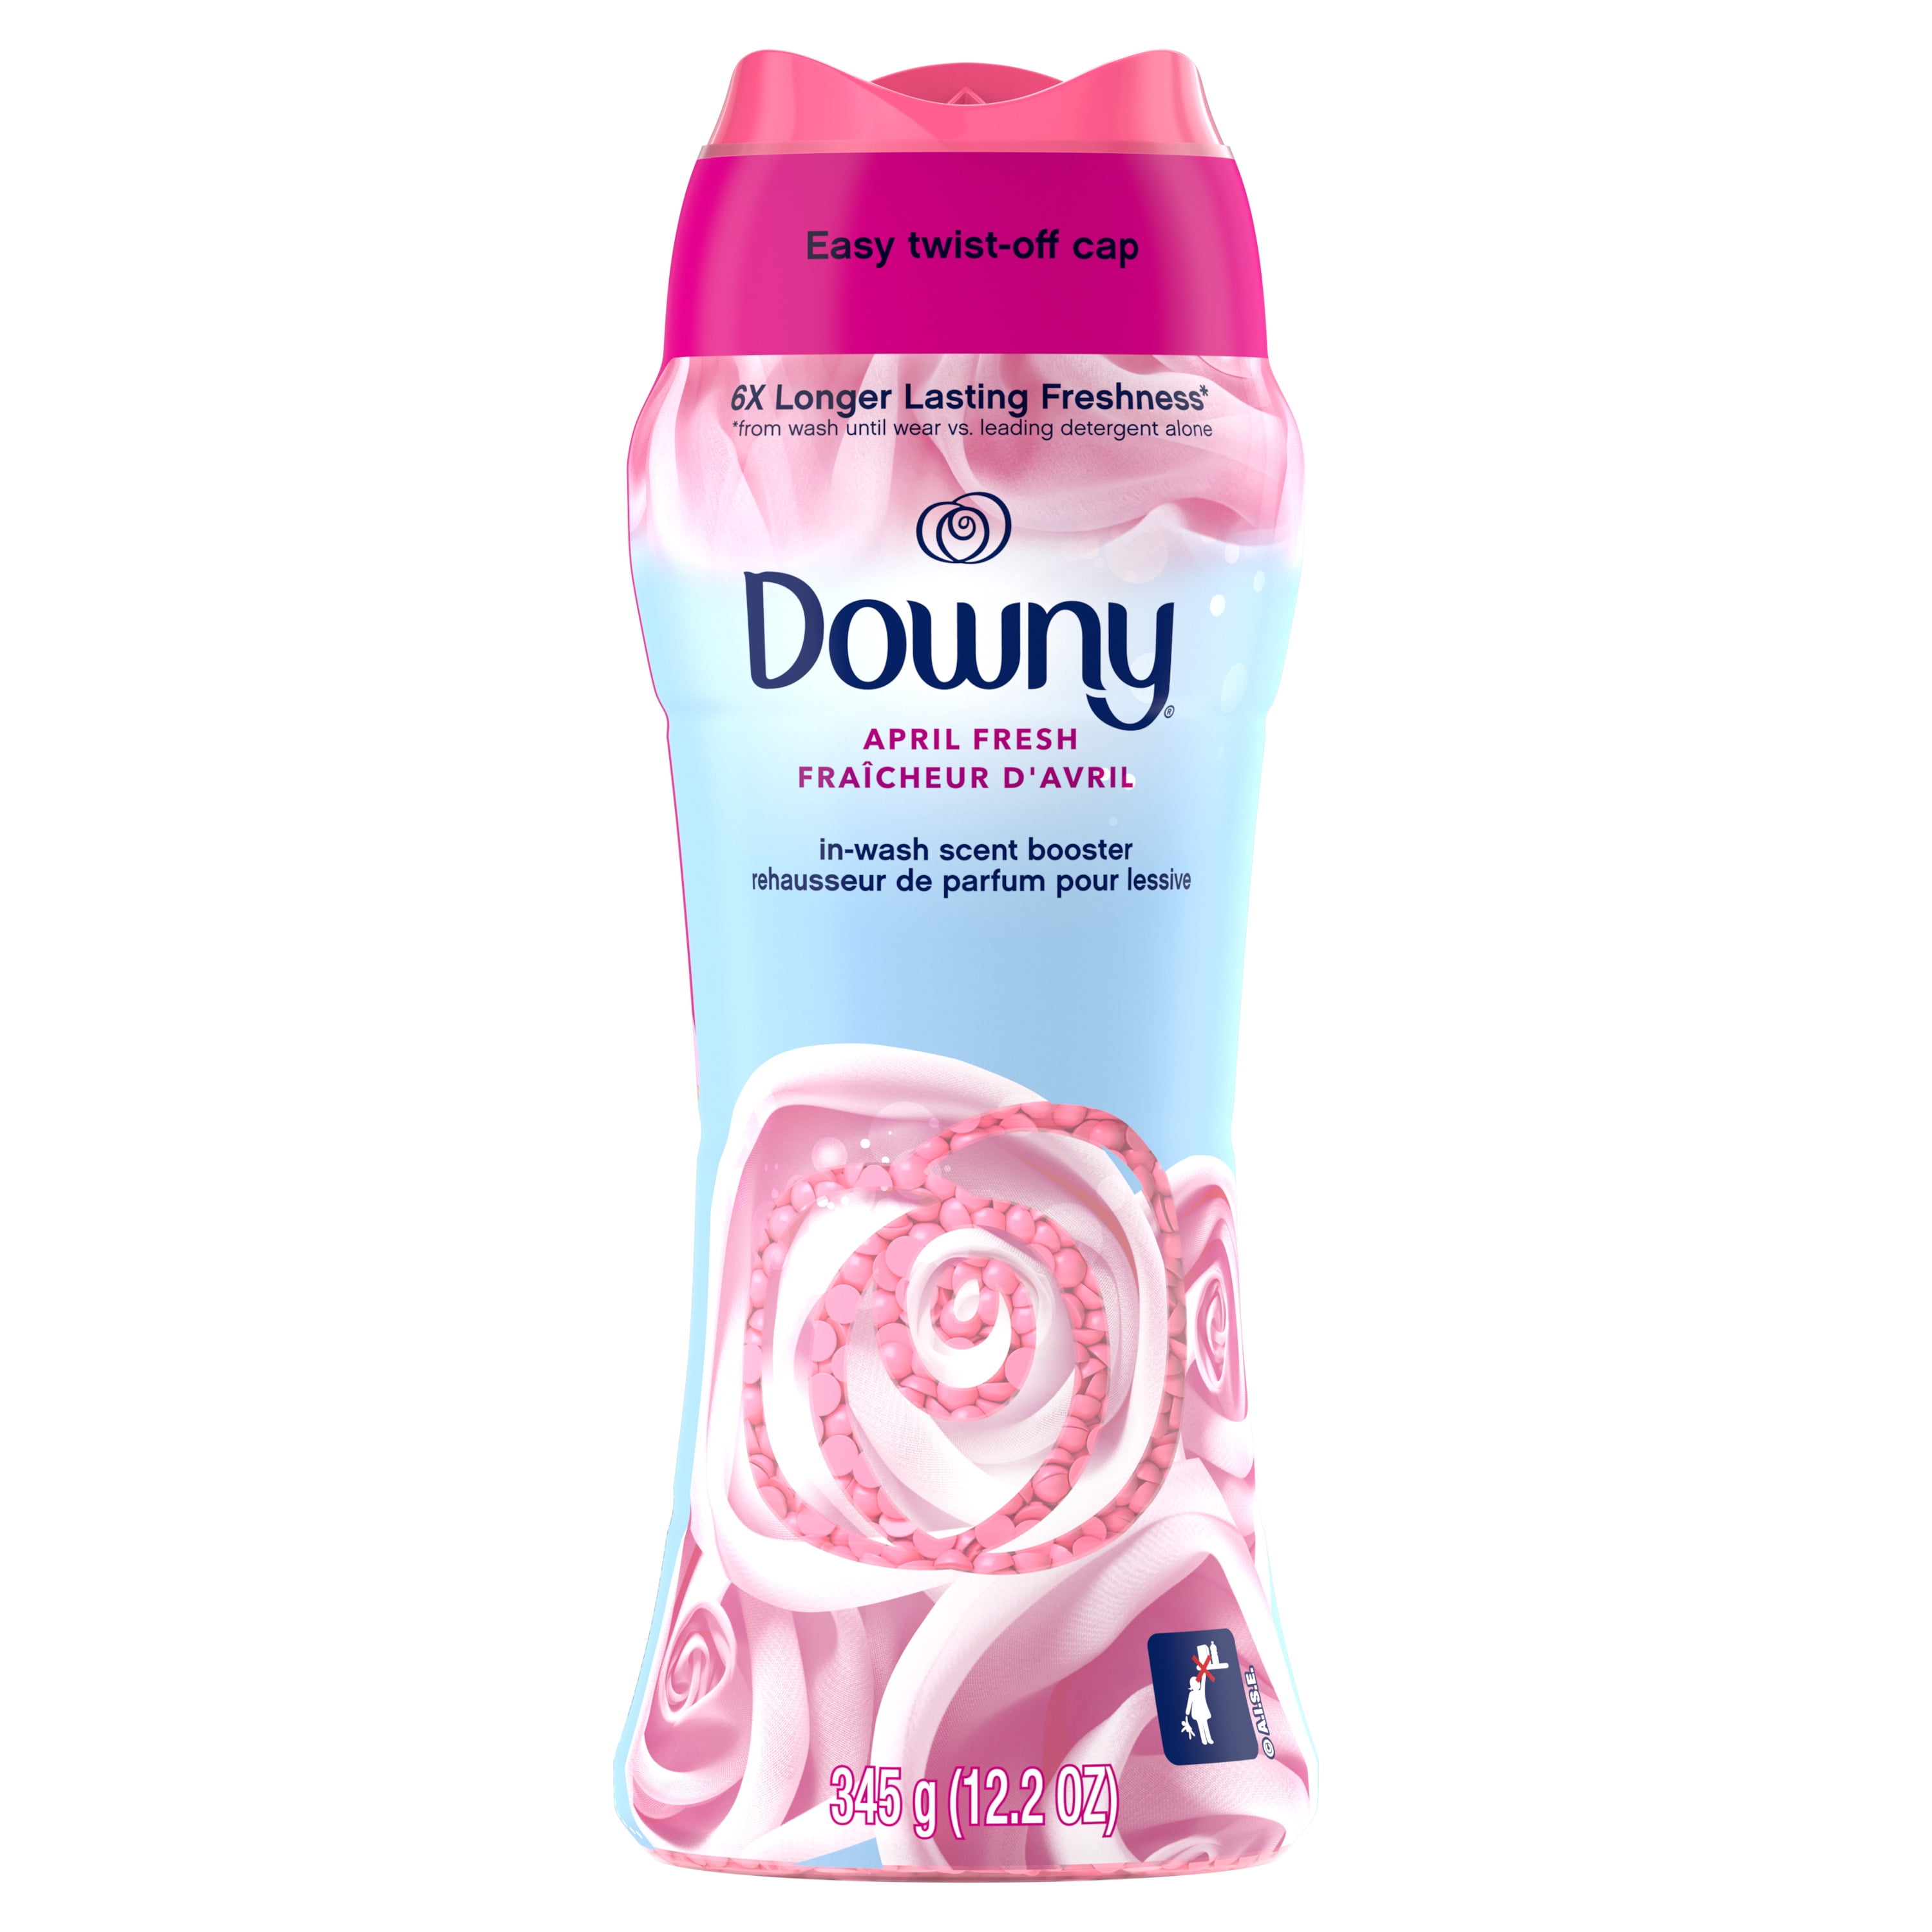 Downy April Fresh In-Wash Scent Beads with Febreze Odor Defense, 37.5 oz.